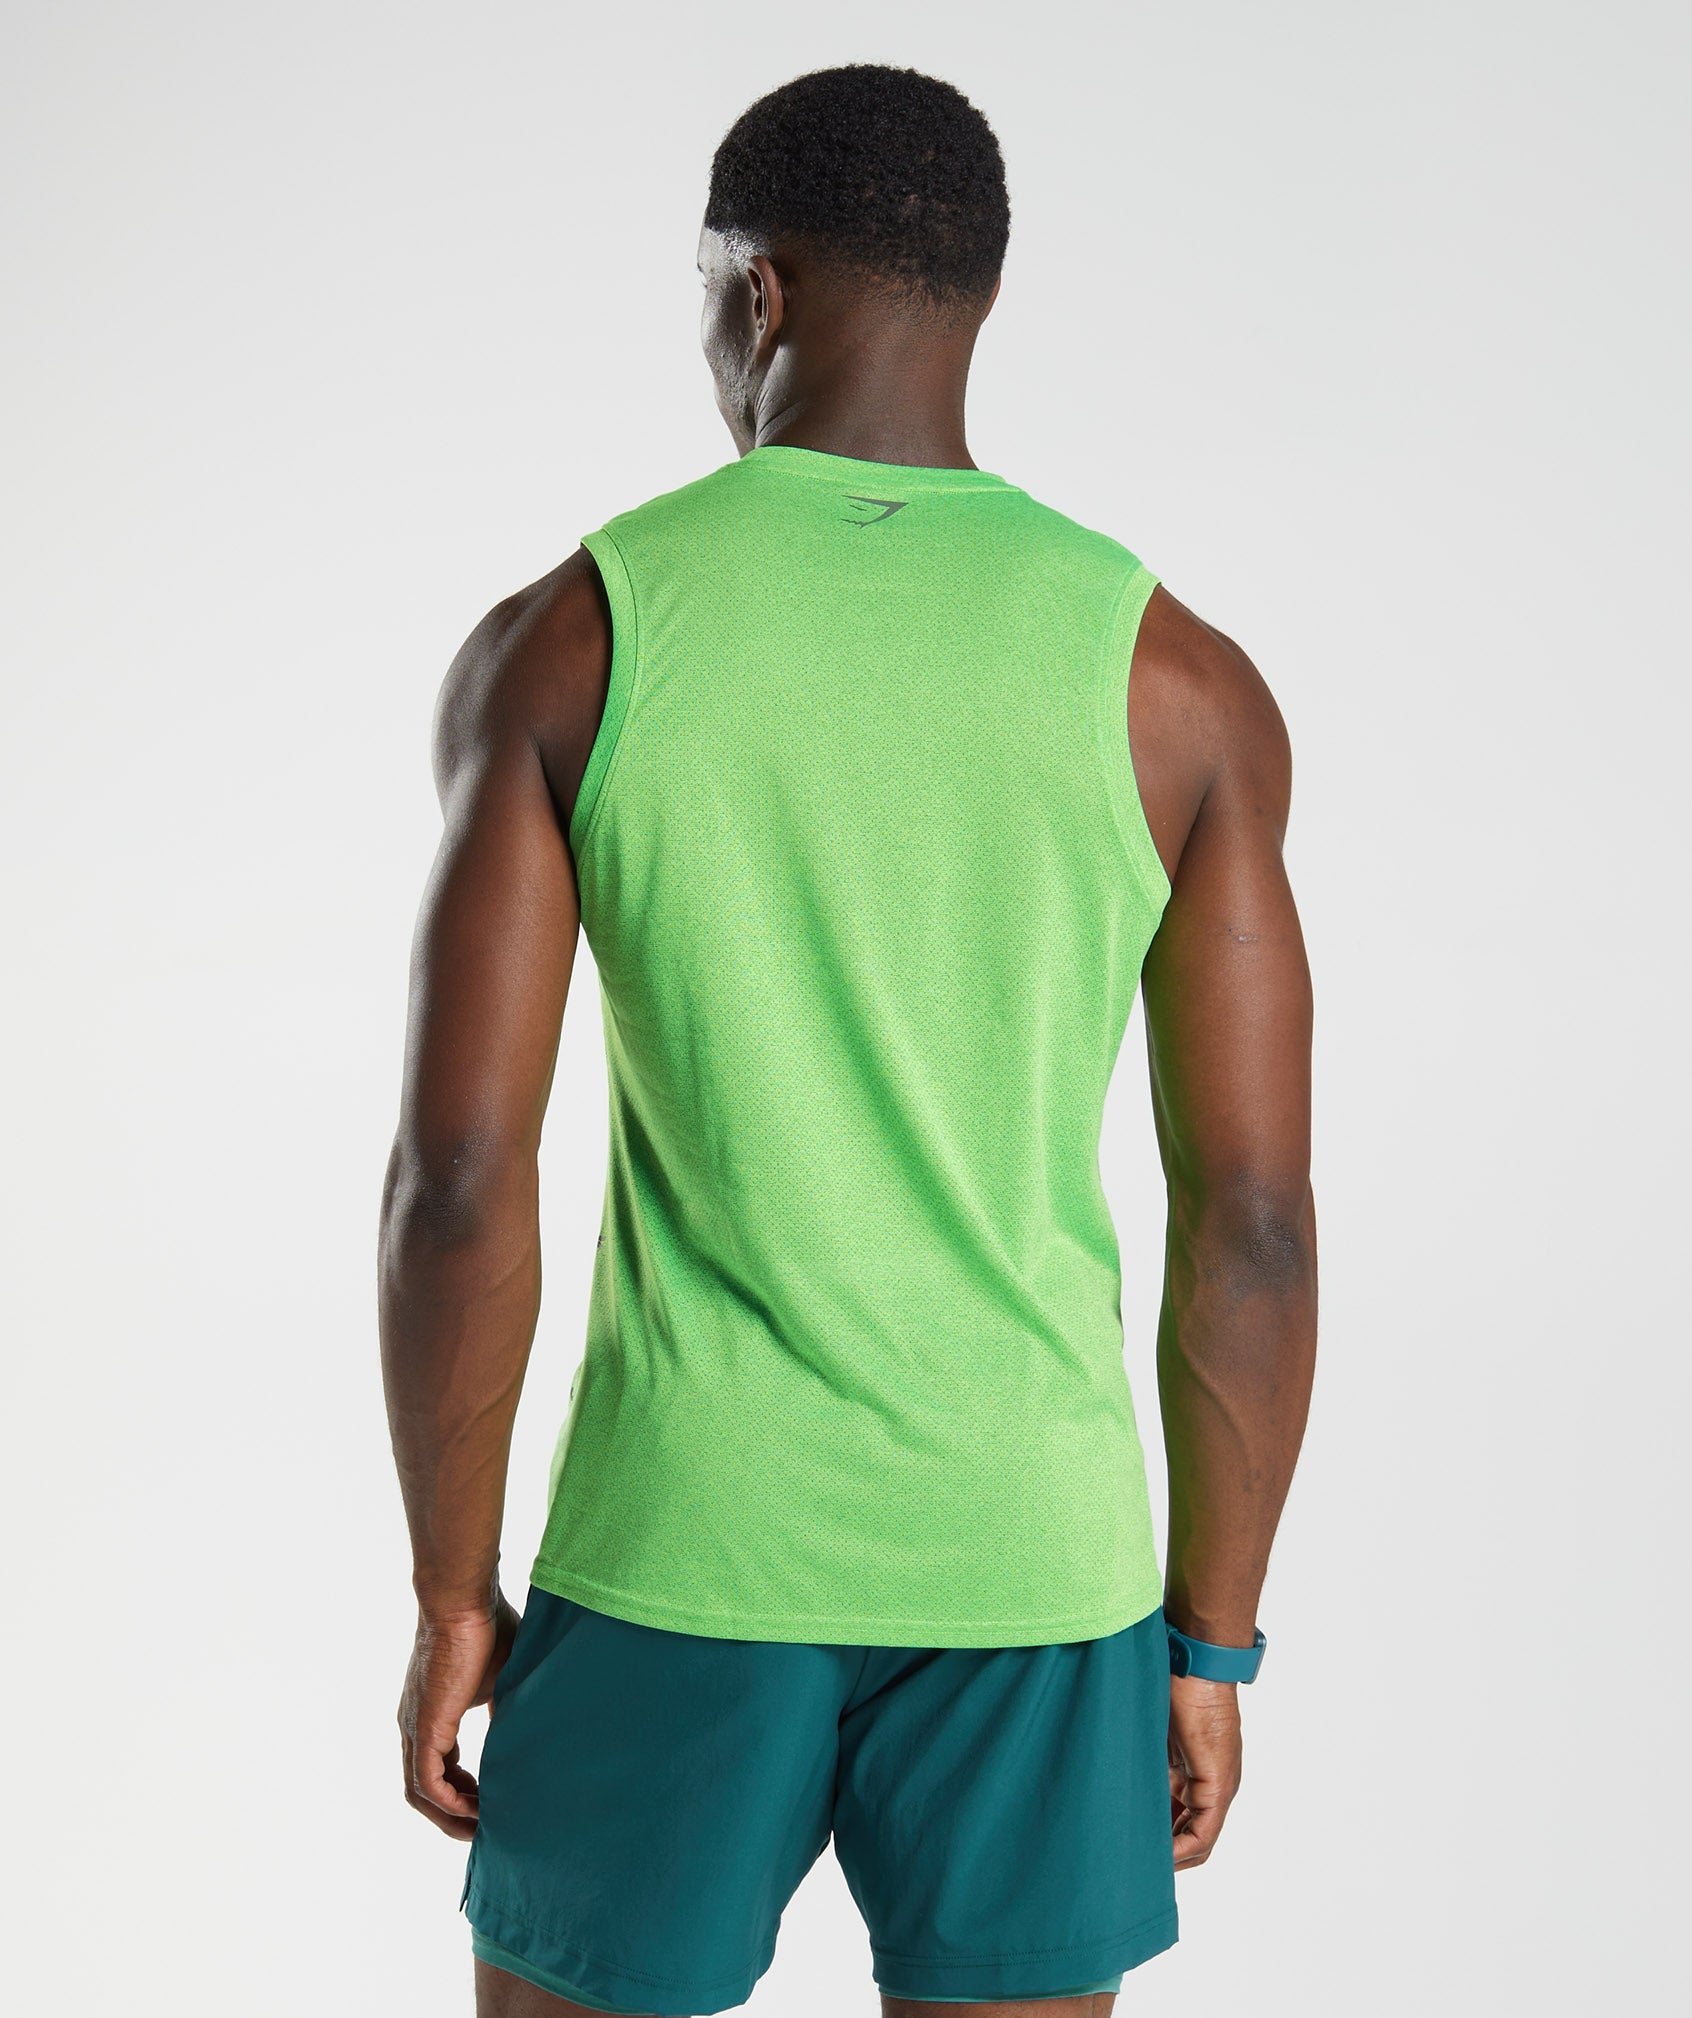 Sport Tank in Fluo Lime/Black Marl - view 2